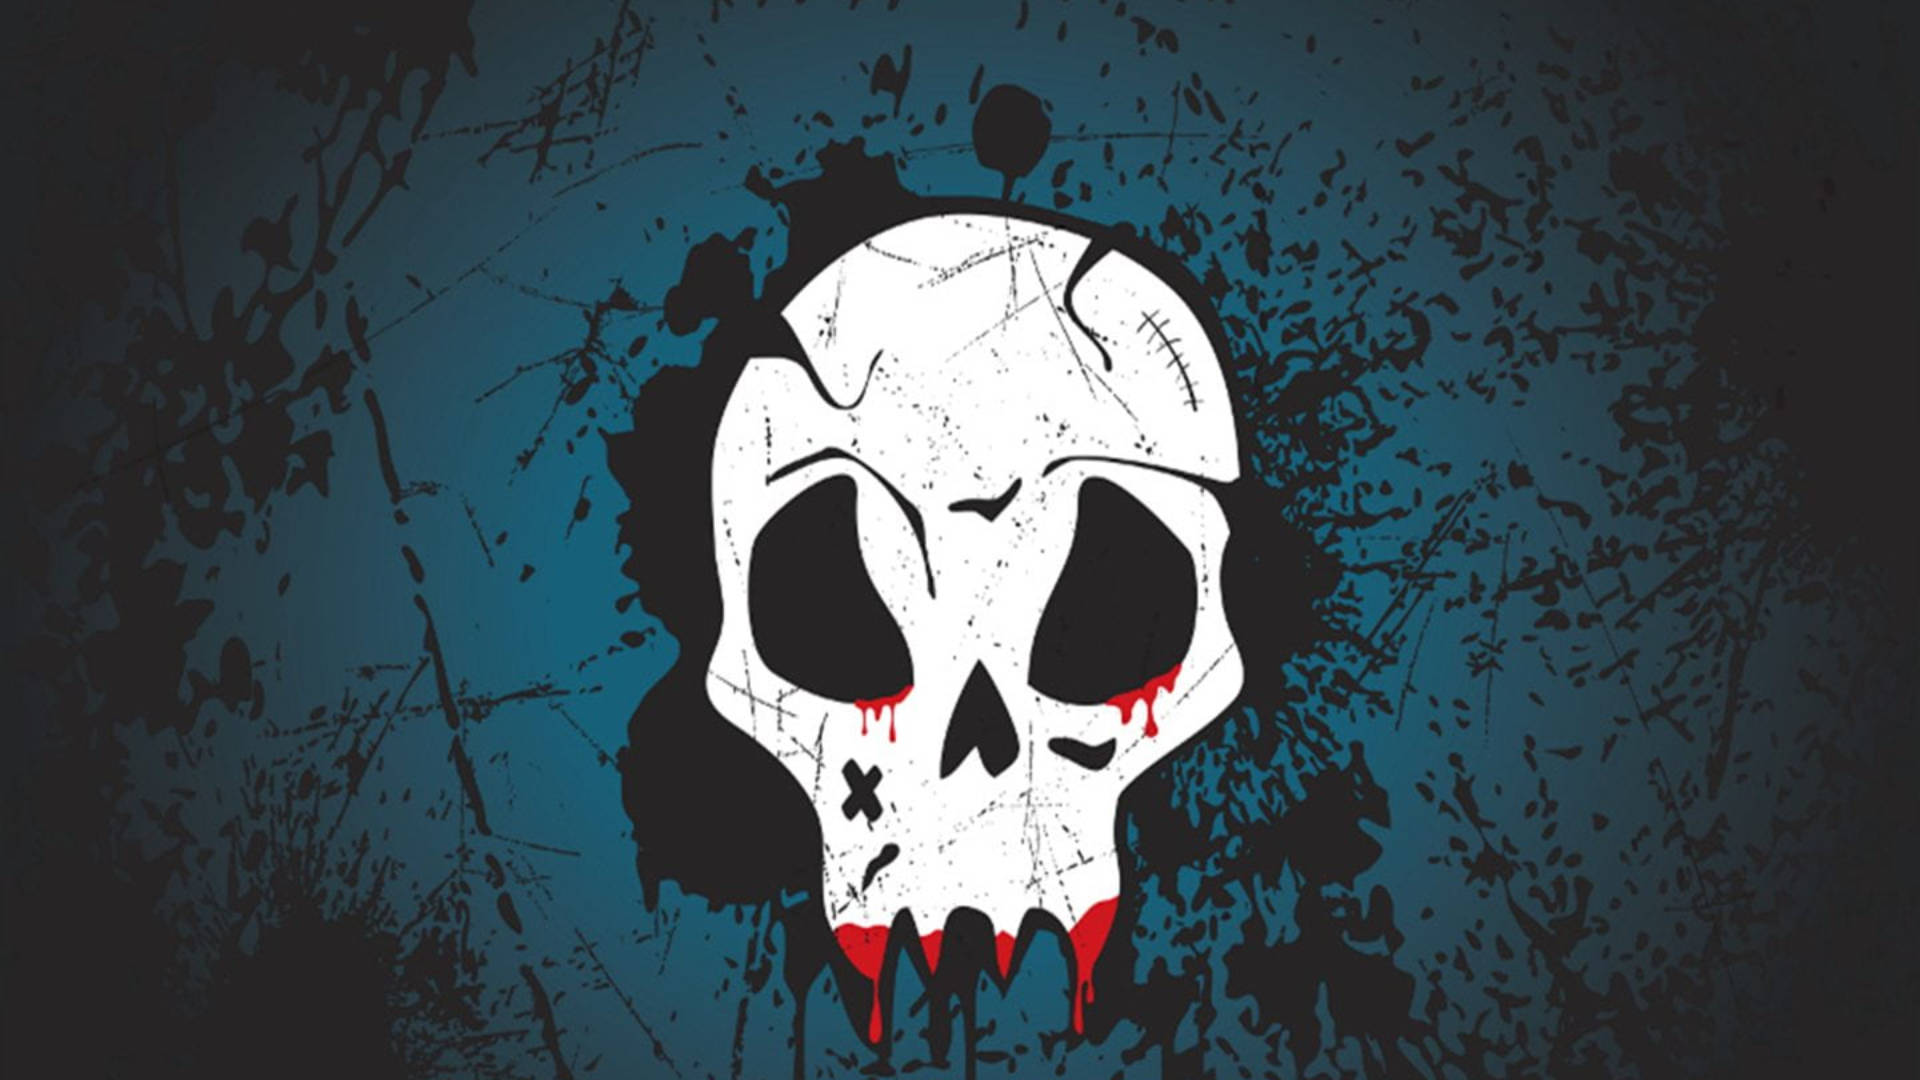 Skull Wallpaper Photos Download The BEST Free Skull Wallpaper Stock Photos   HD Images